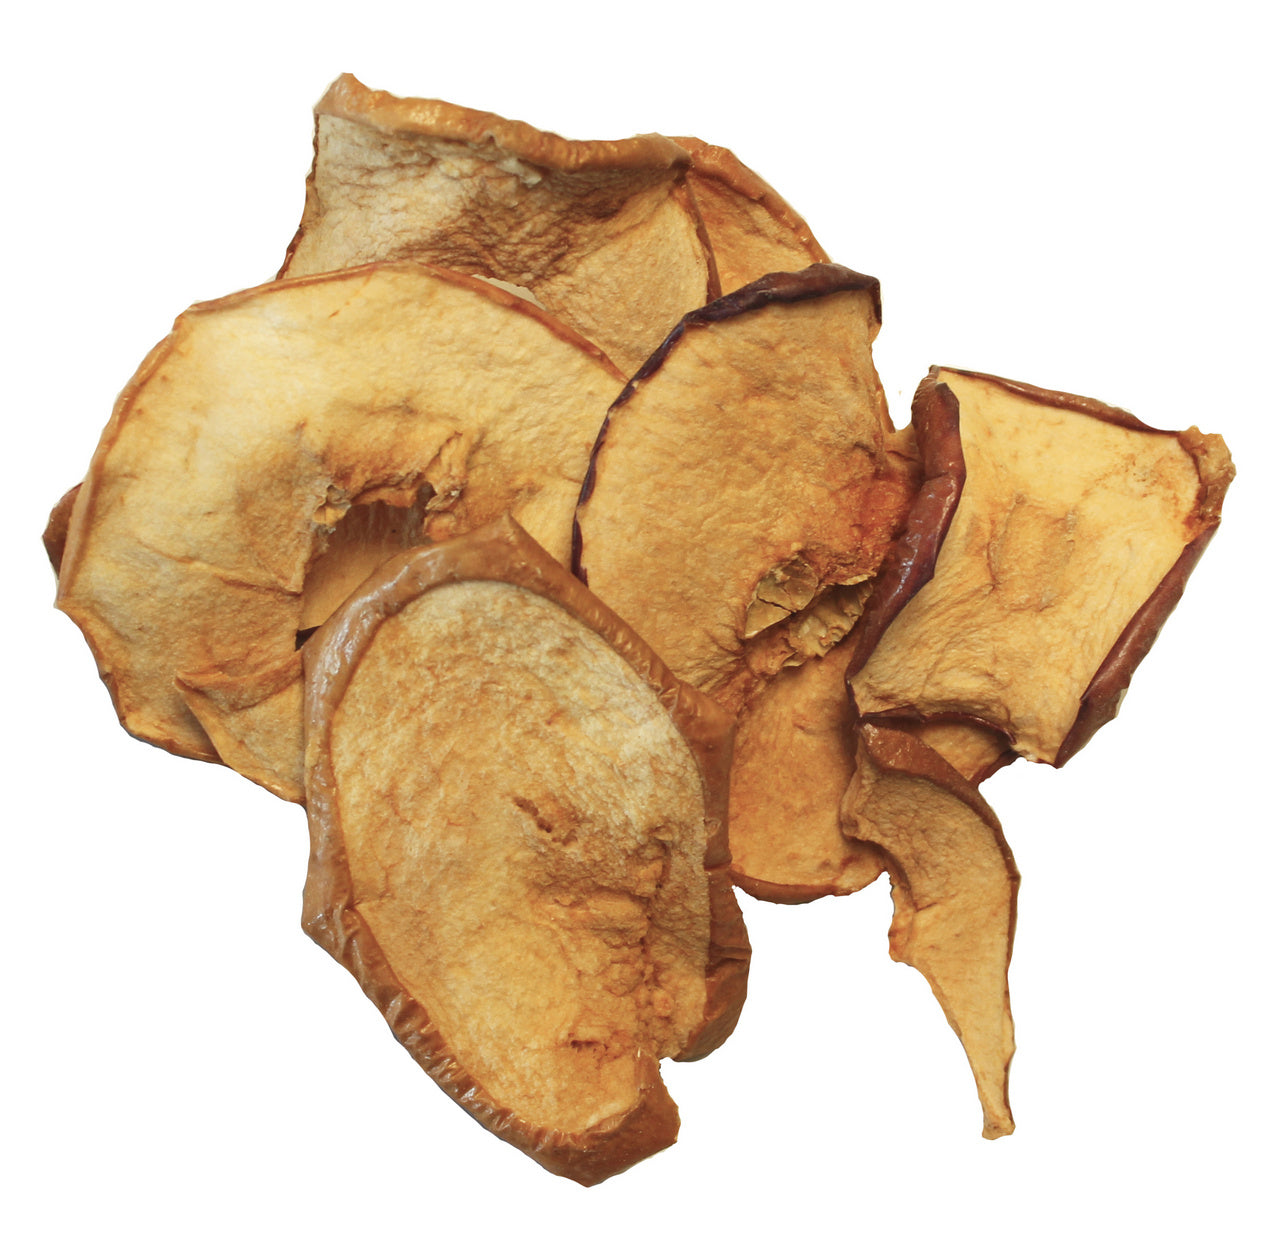 New Dried Sweet Apple Chips